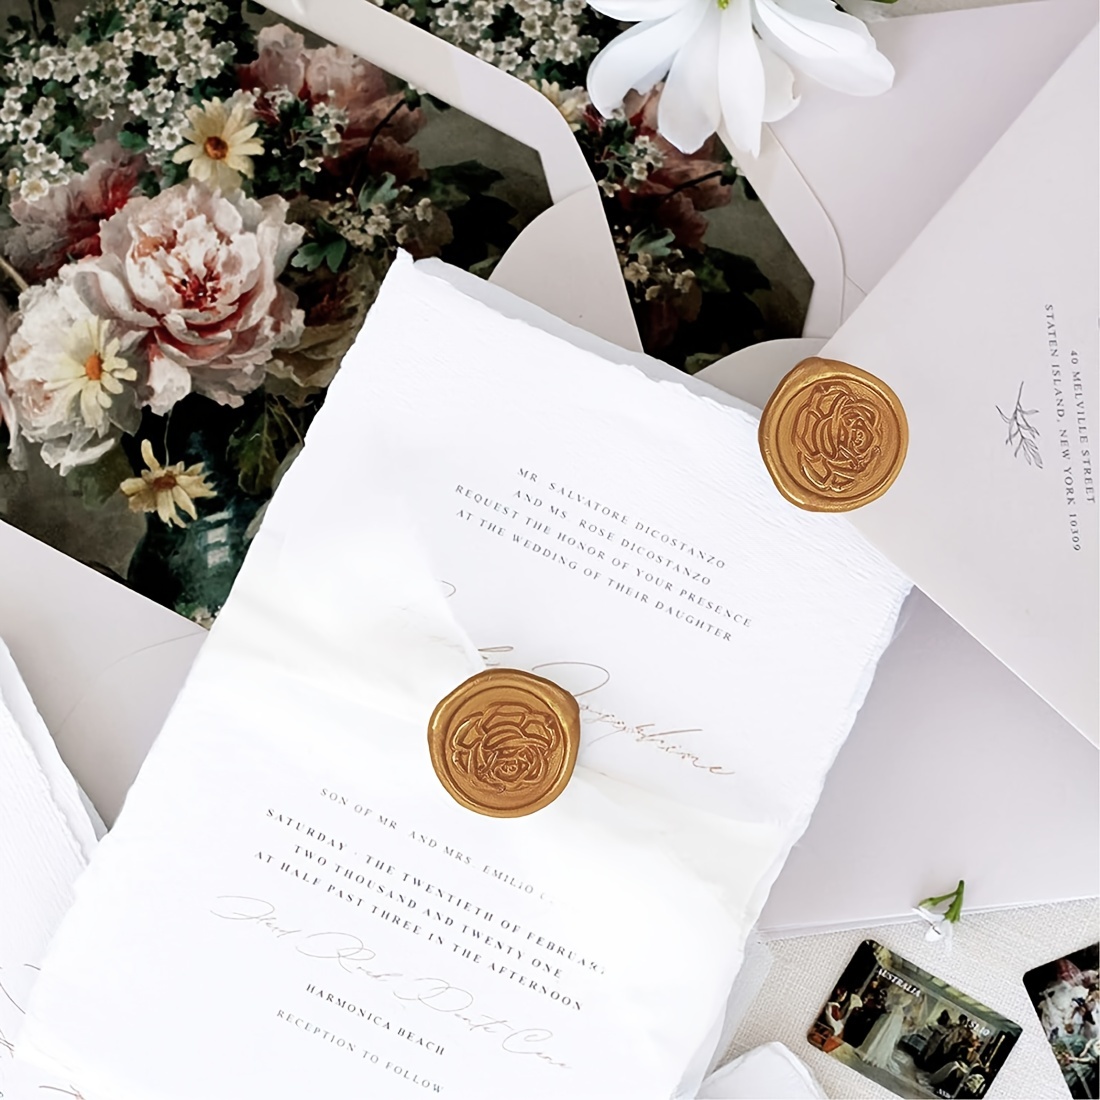 Decorate your mails and enveloppes with a flower rose wax seal stamp.